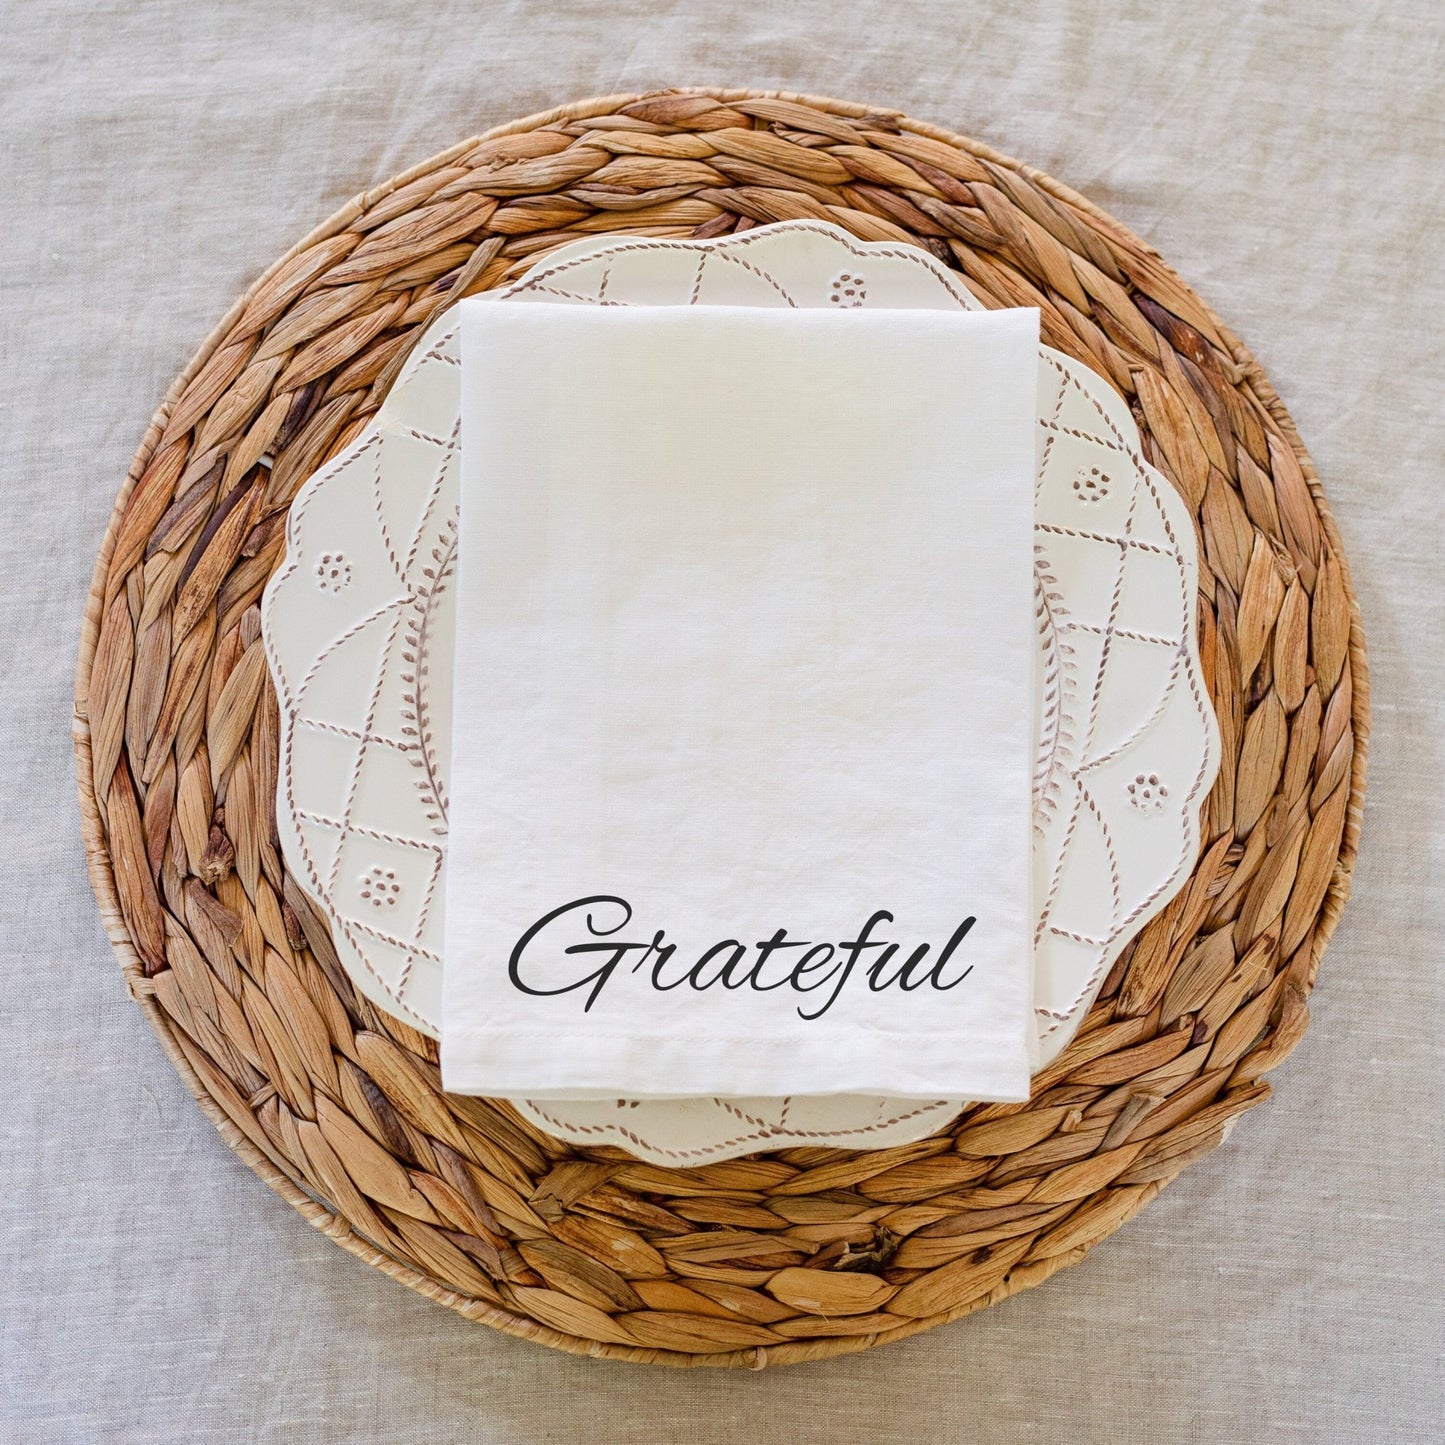 Thankful Grateful Blessed Gather 100% Linen Napkin Set of 4 | Holiday Table Decor | Cloth Napkins | Thanksgiving or Christmas Place Setting - Sweet Hooligans Design